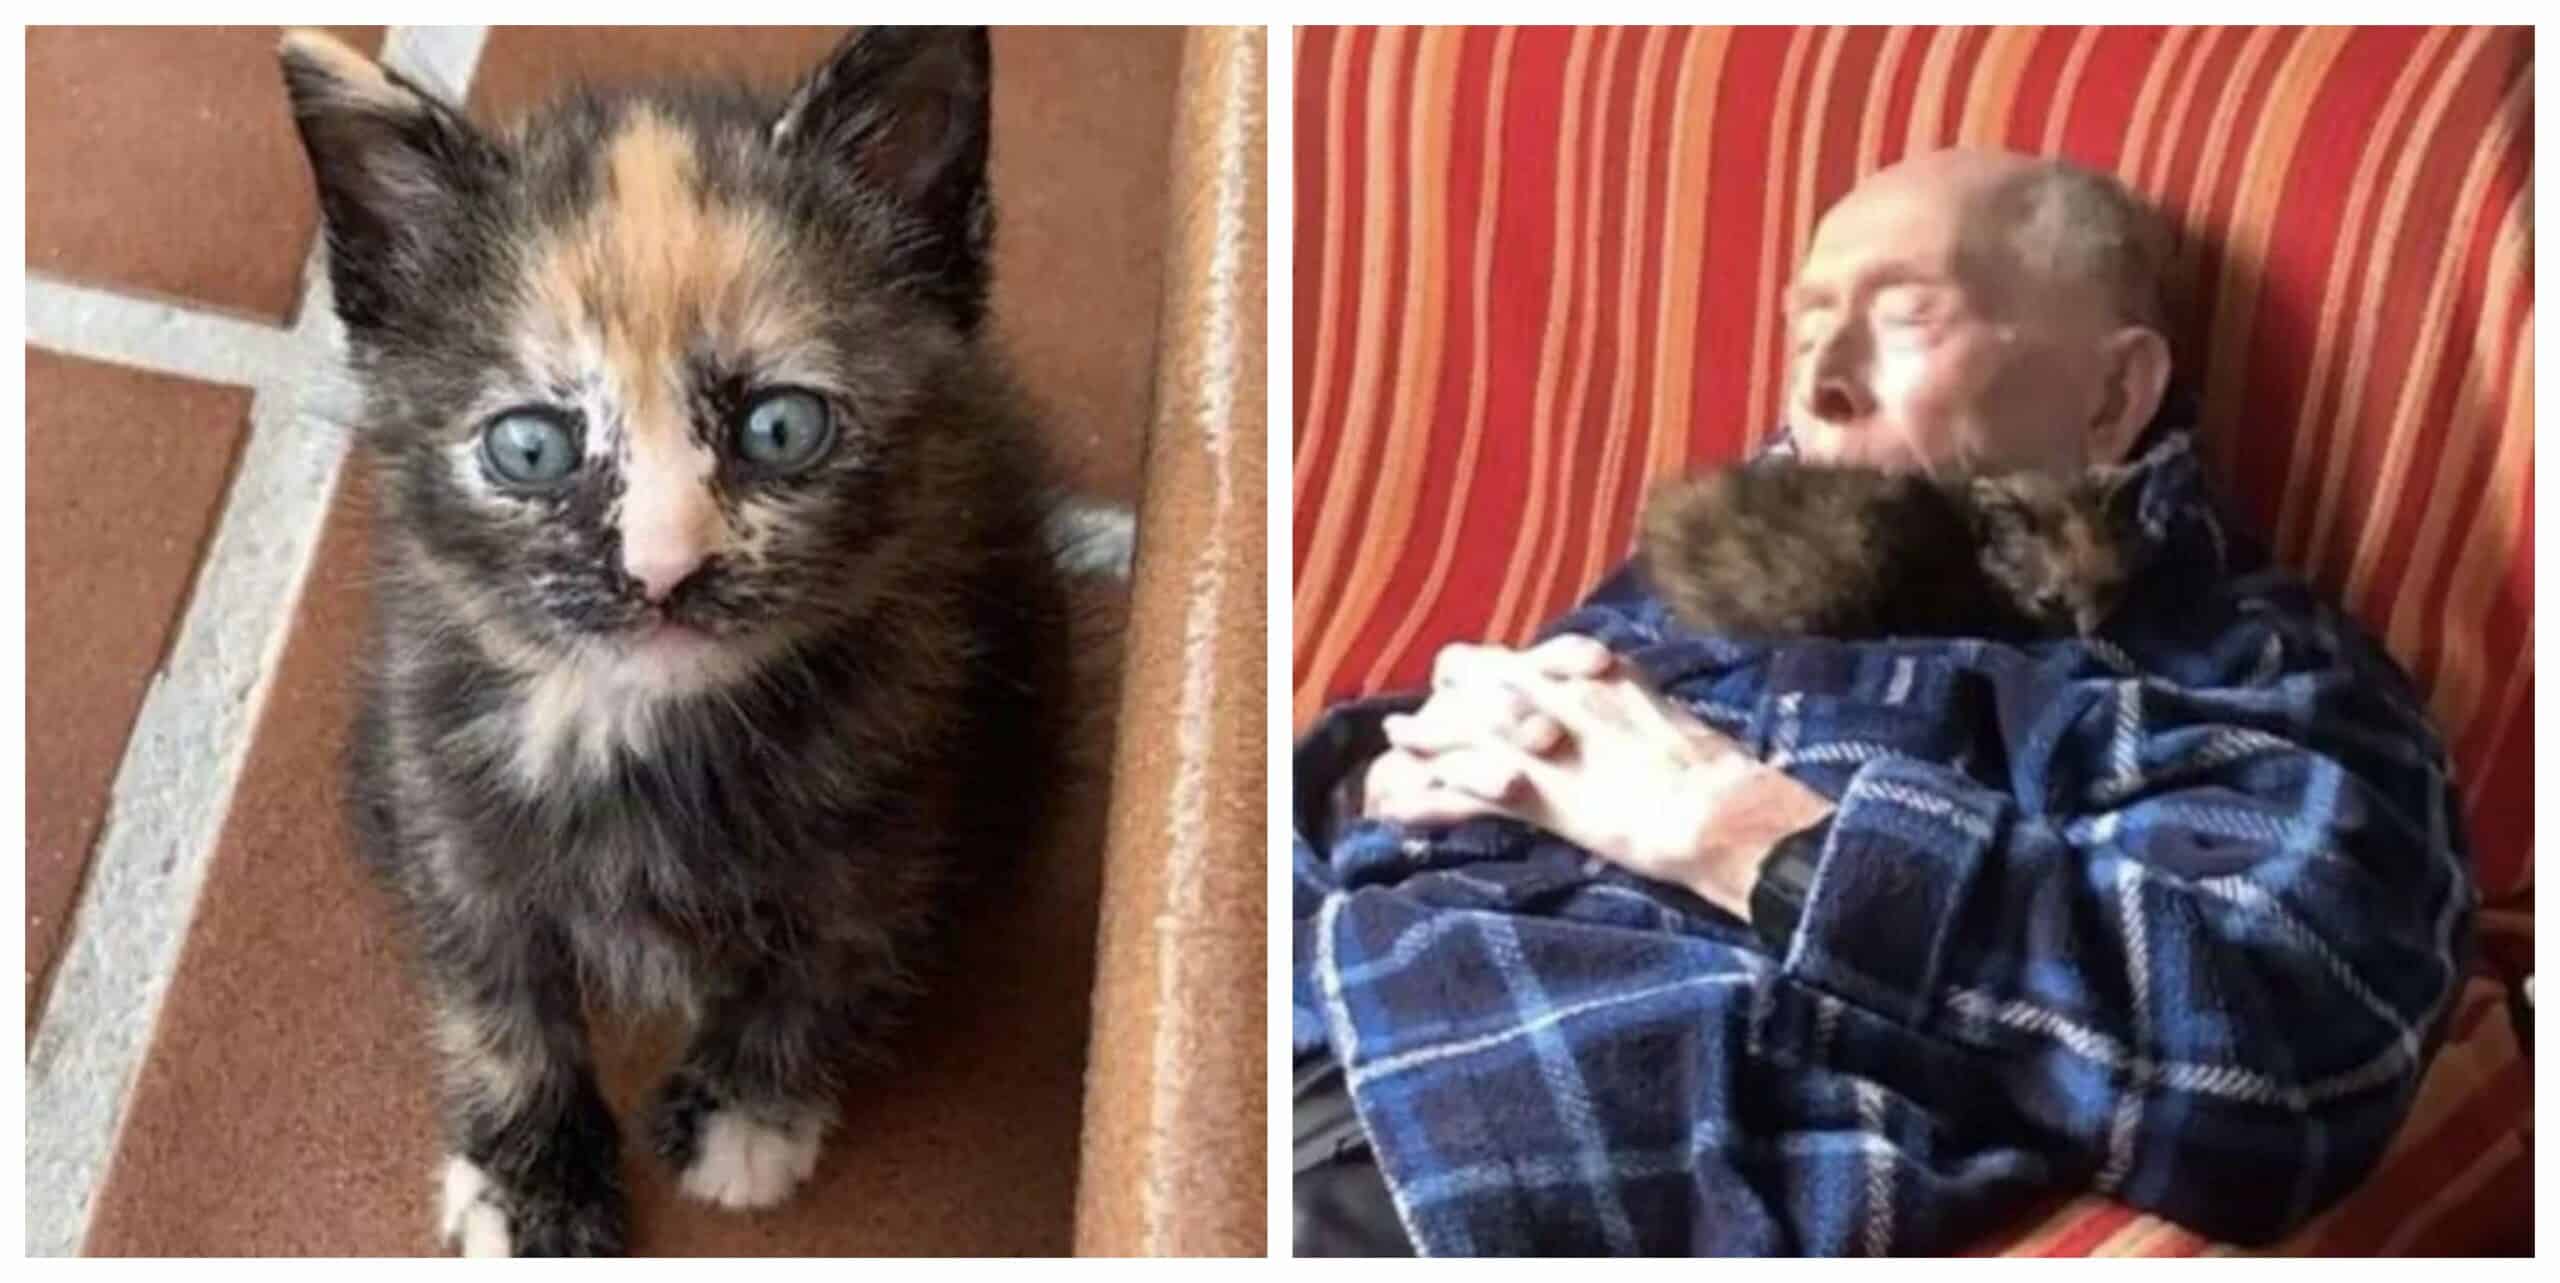 A stray kitten adopts a grandpa who is 100 years old and the two become best friends